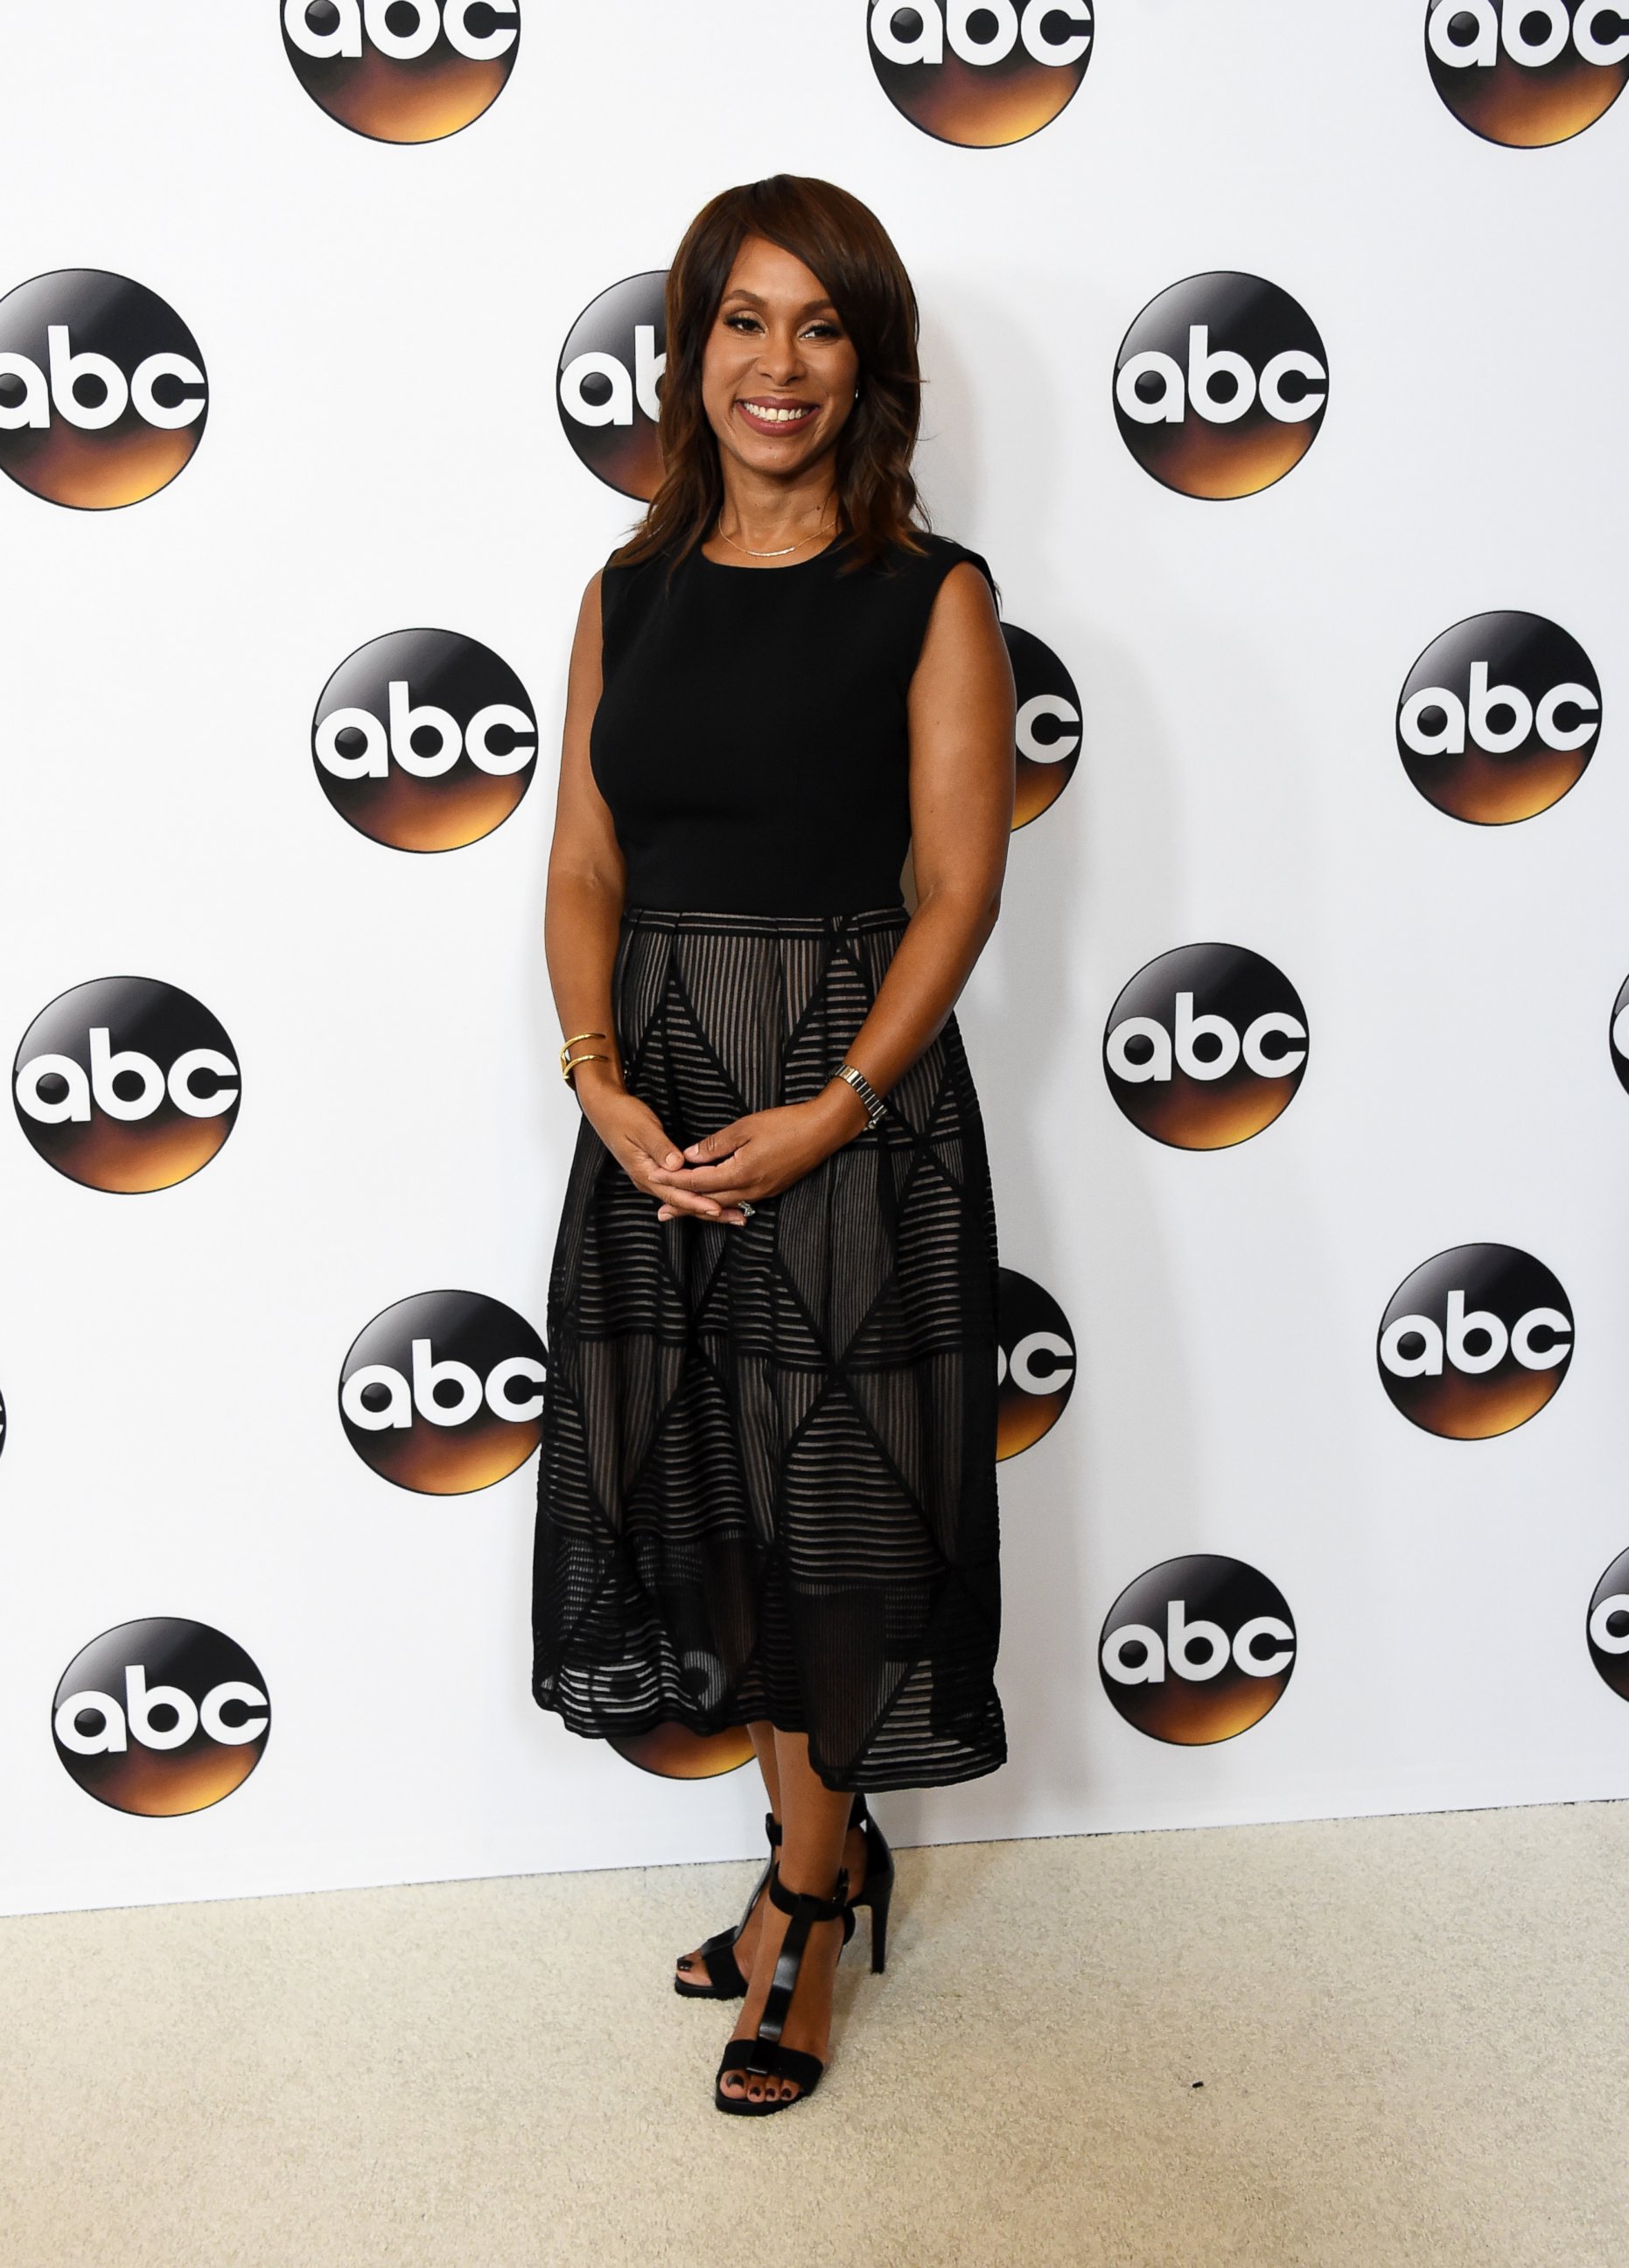 PHOTO: ABC Entertainment President Channing Dungey attends the Disney ABC Television Group TCA Summer Press Tour on Aug. 4, 2016 in Beverly Hills, Calif. 